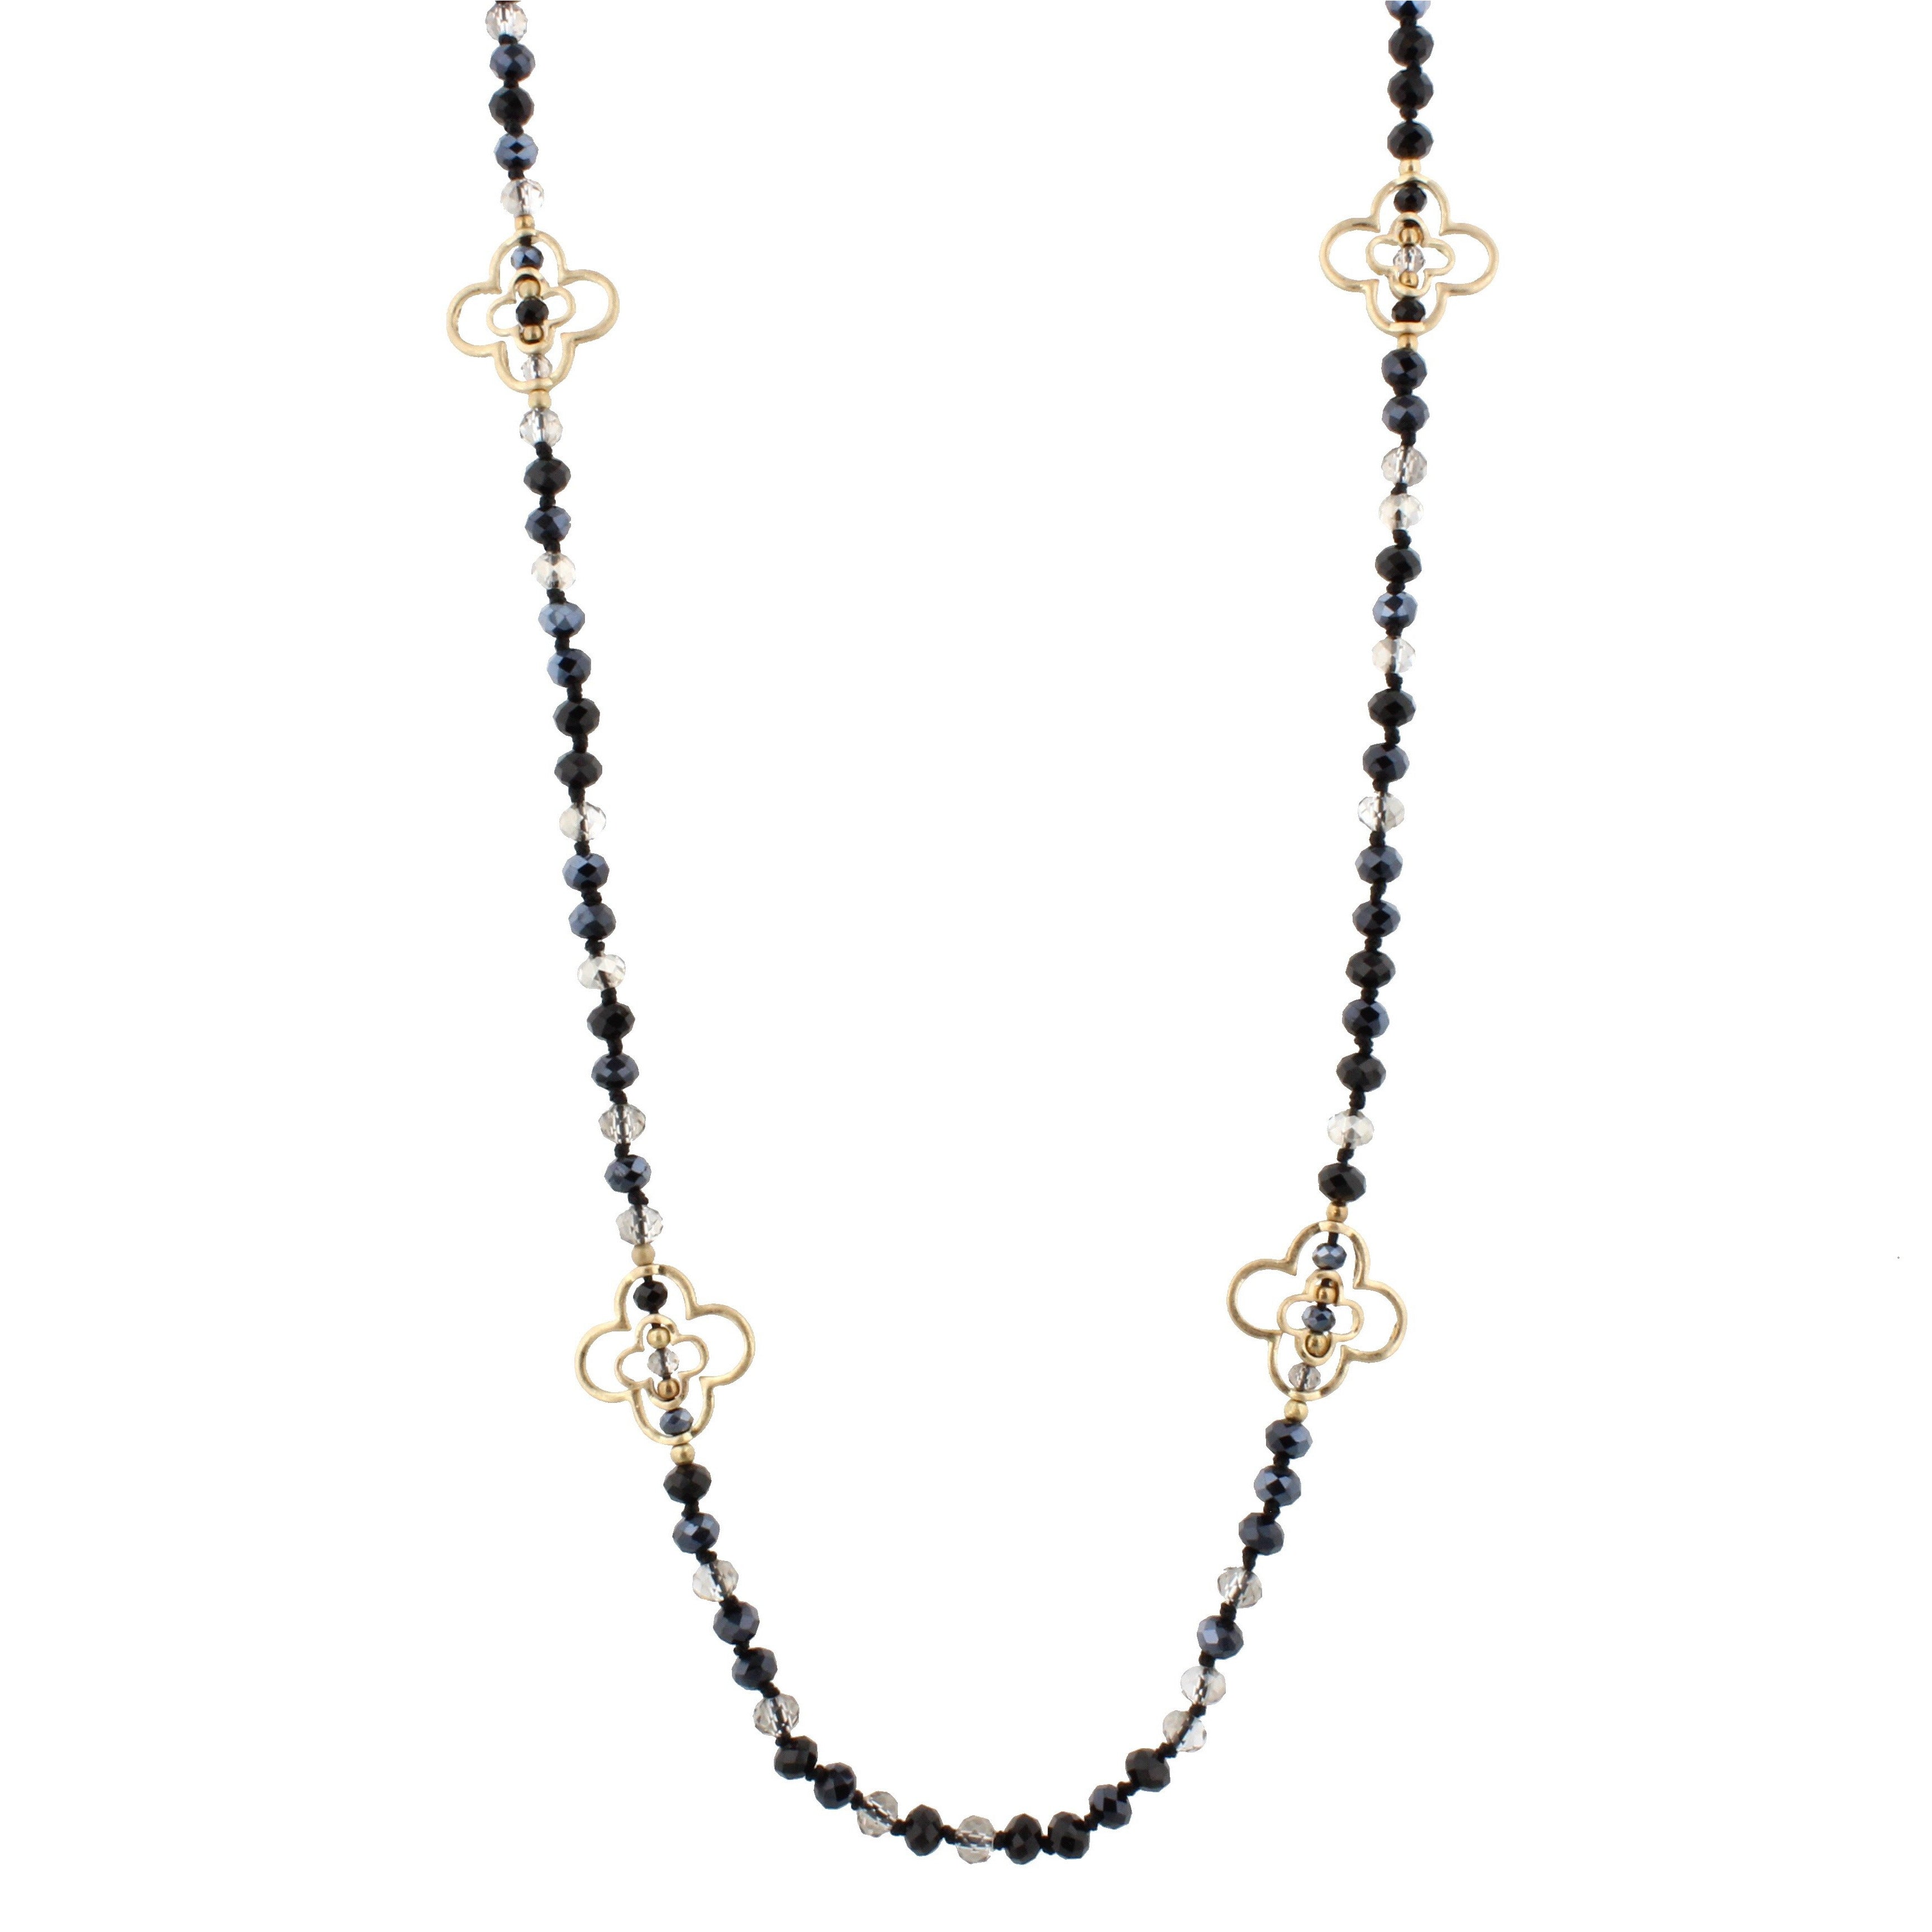 Jane Marie Handknotted Necklace with Clover Stations